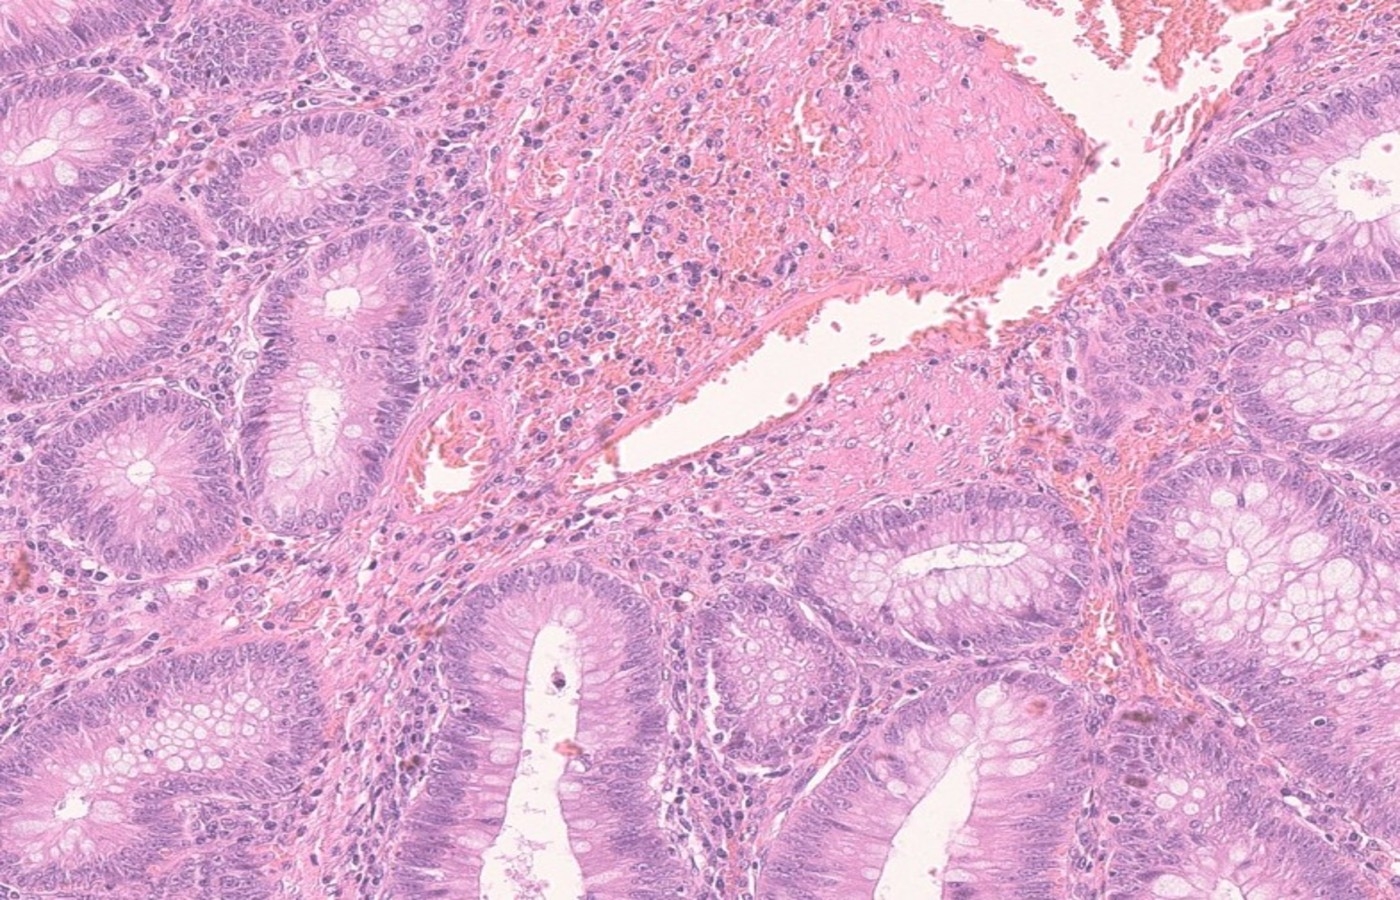 H&E stain of colonic polyp